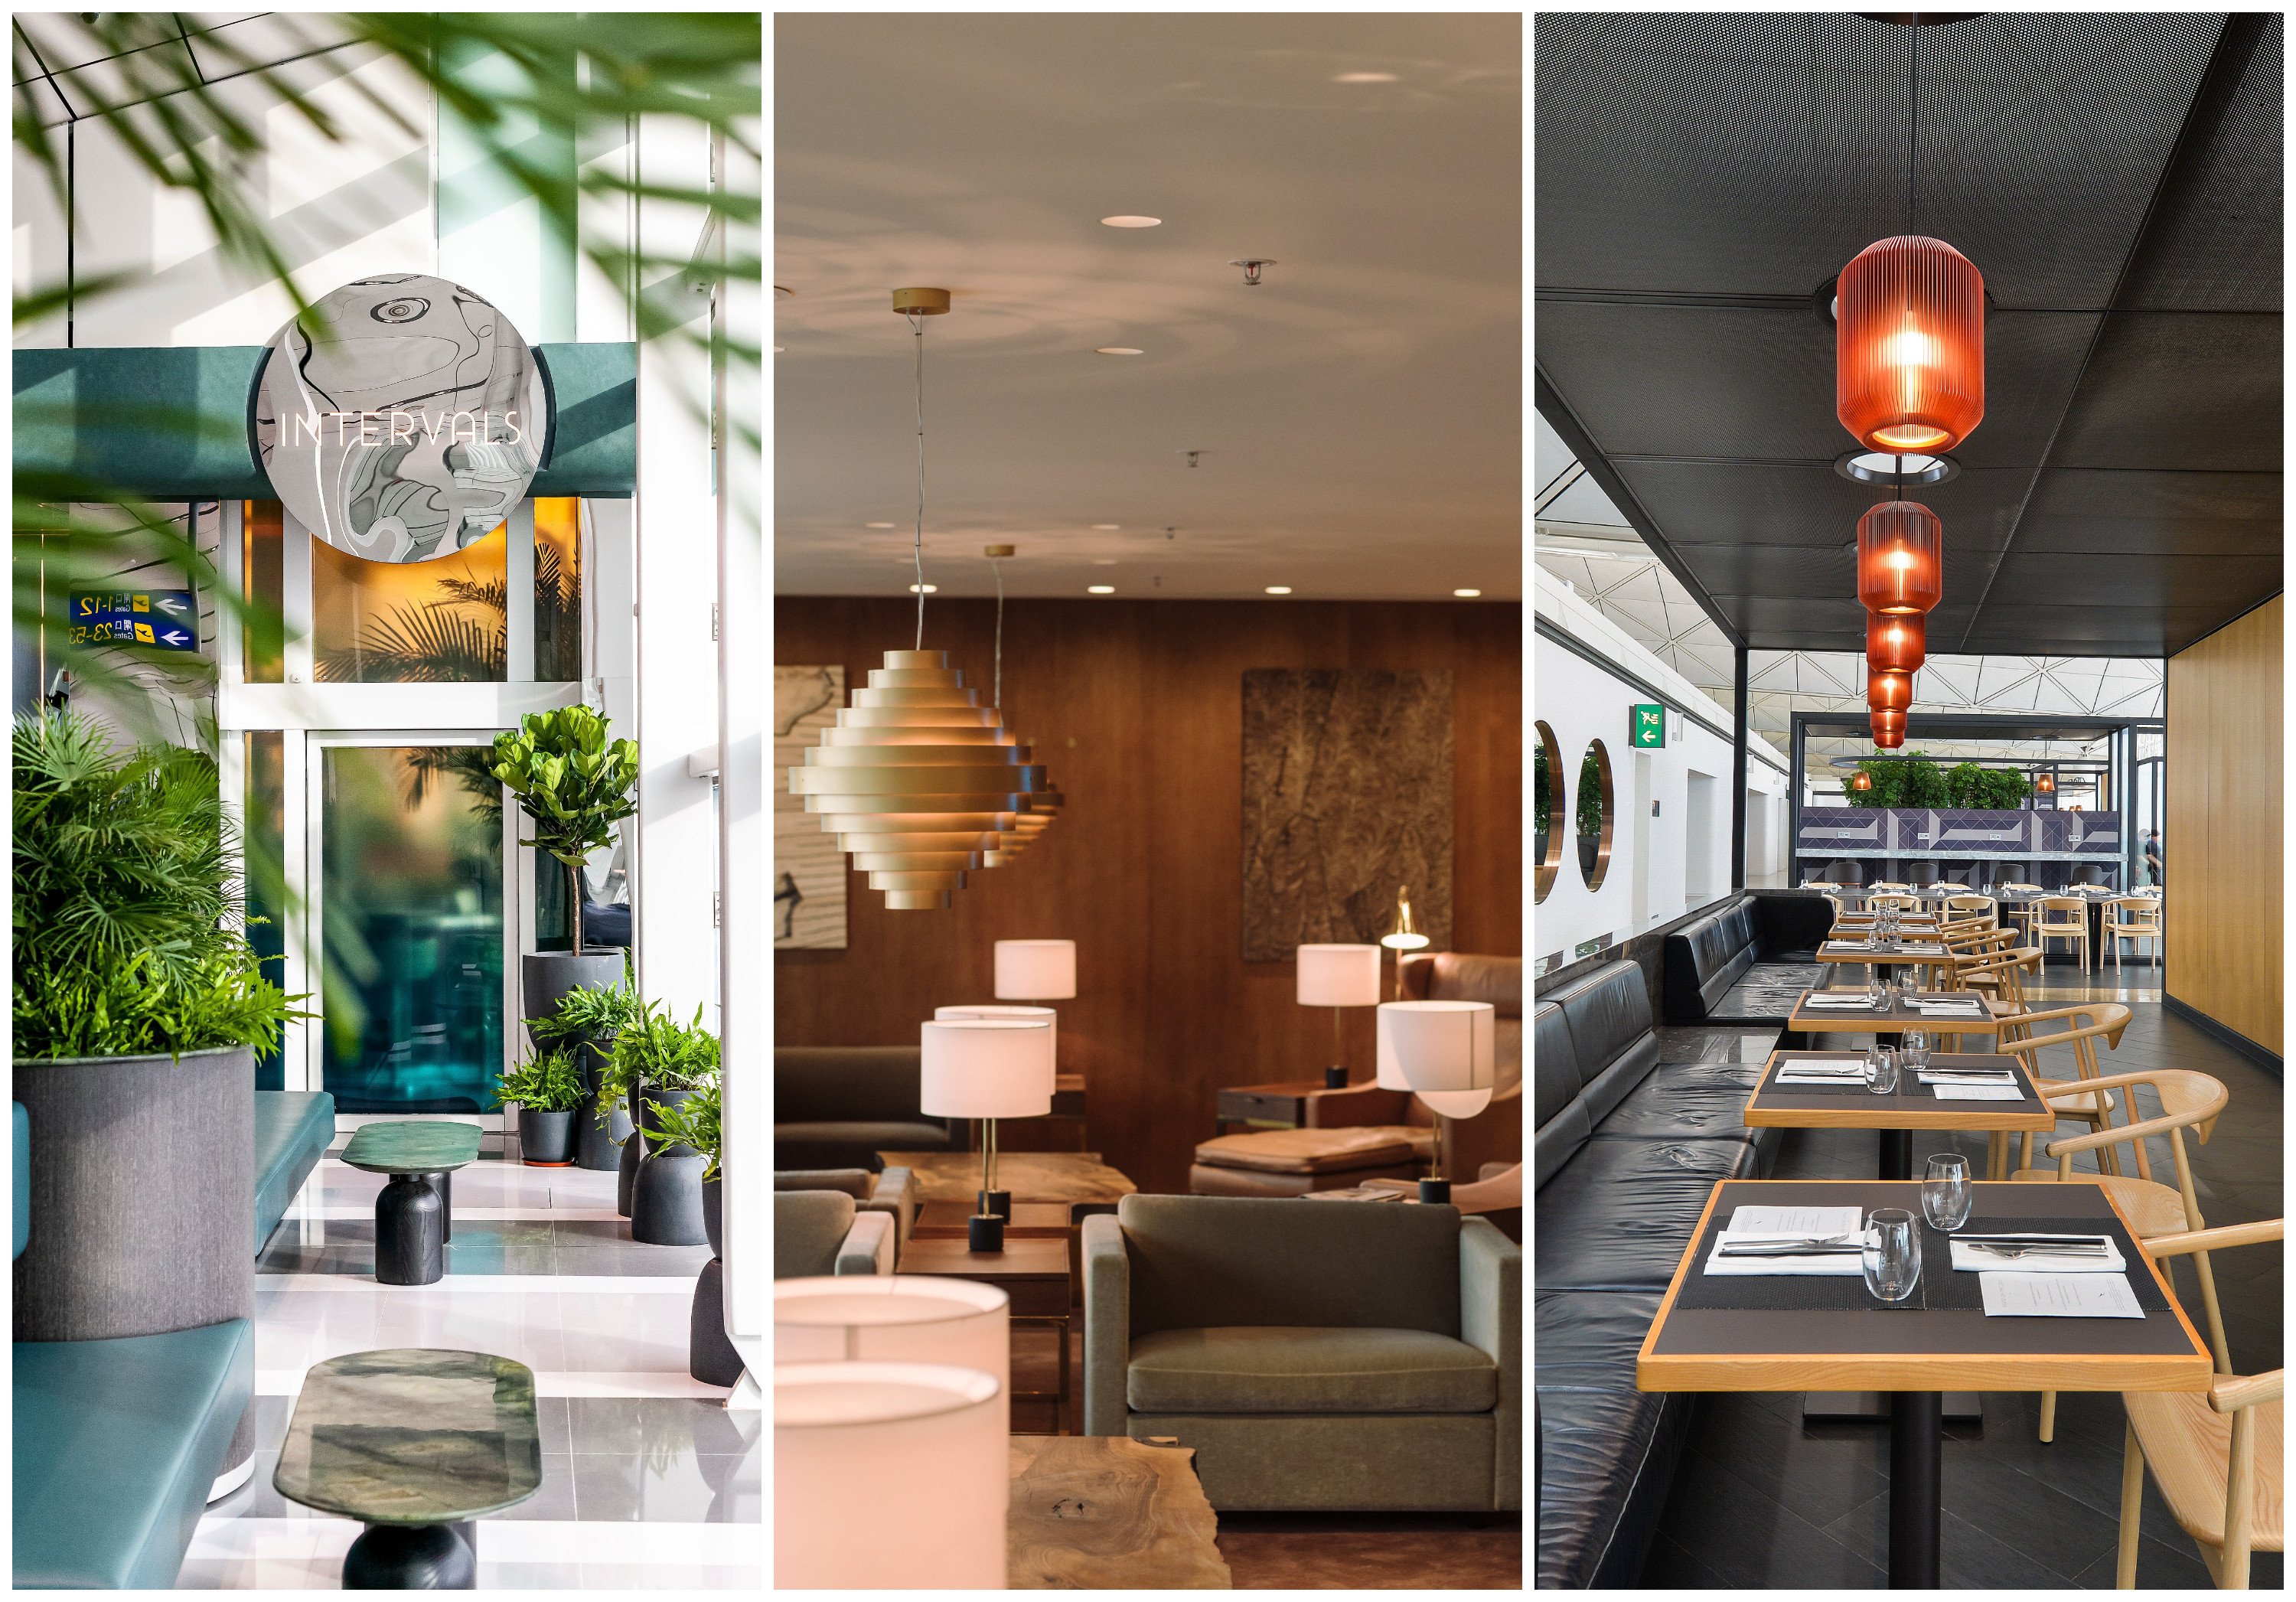 Cathay Pacific and Qantas have reopened their lounges at Hong Kong International Airport, while new arrival Intervals offers a fresh F&B concept for all. Photos: Intervals, Cathay Pacific, Handout